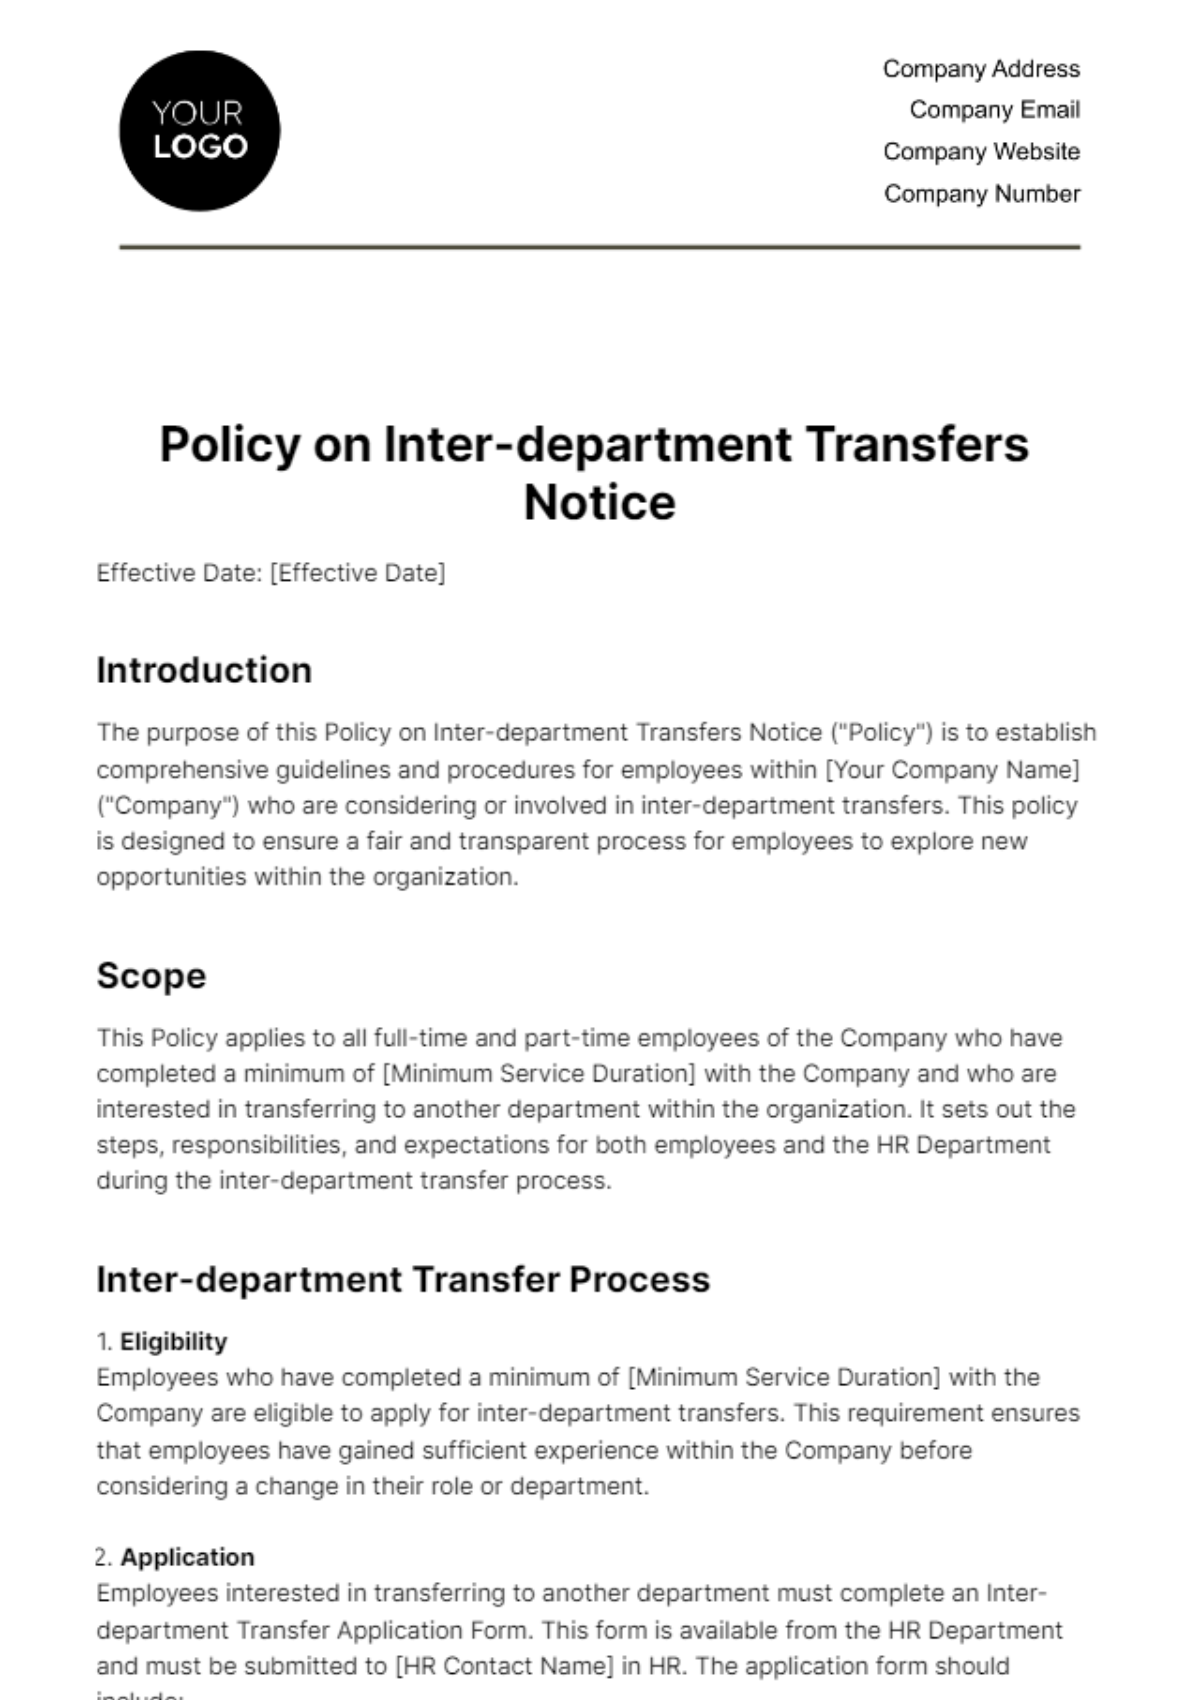 Policy on Inter-department Transfers Notice HR Template